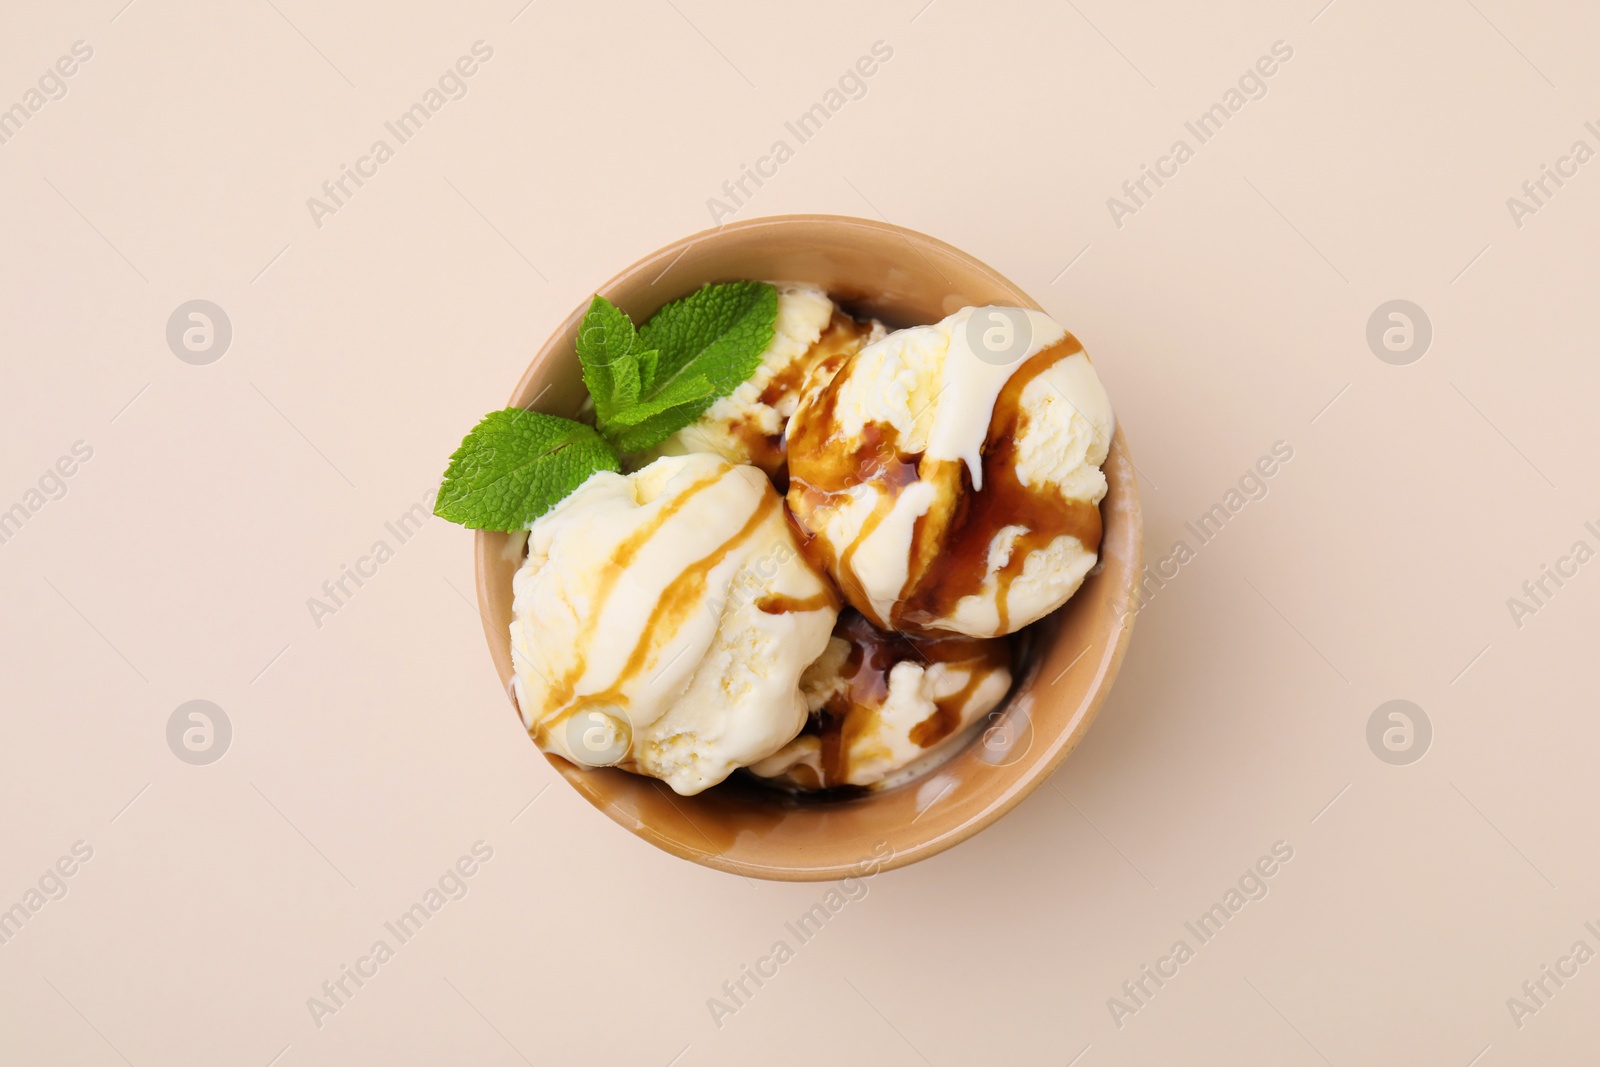 Photo of Scoops of ice cream with caramel sauce and mint leaves on beige table, top view